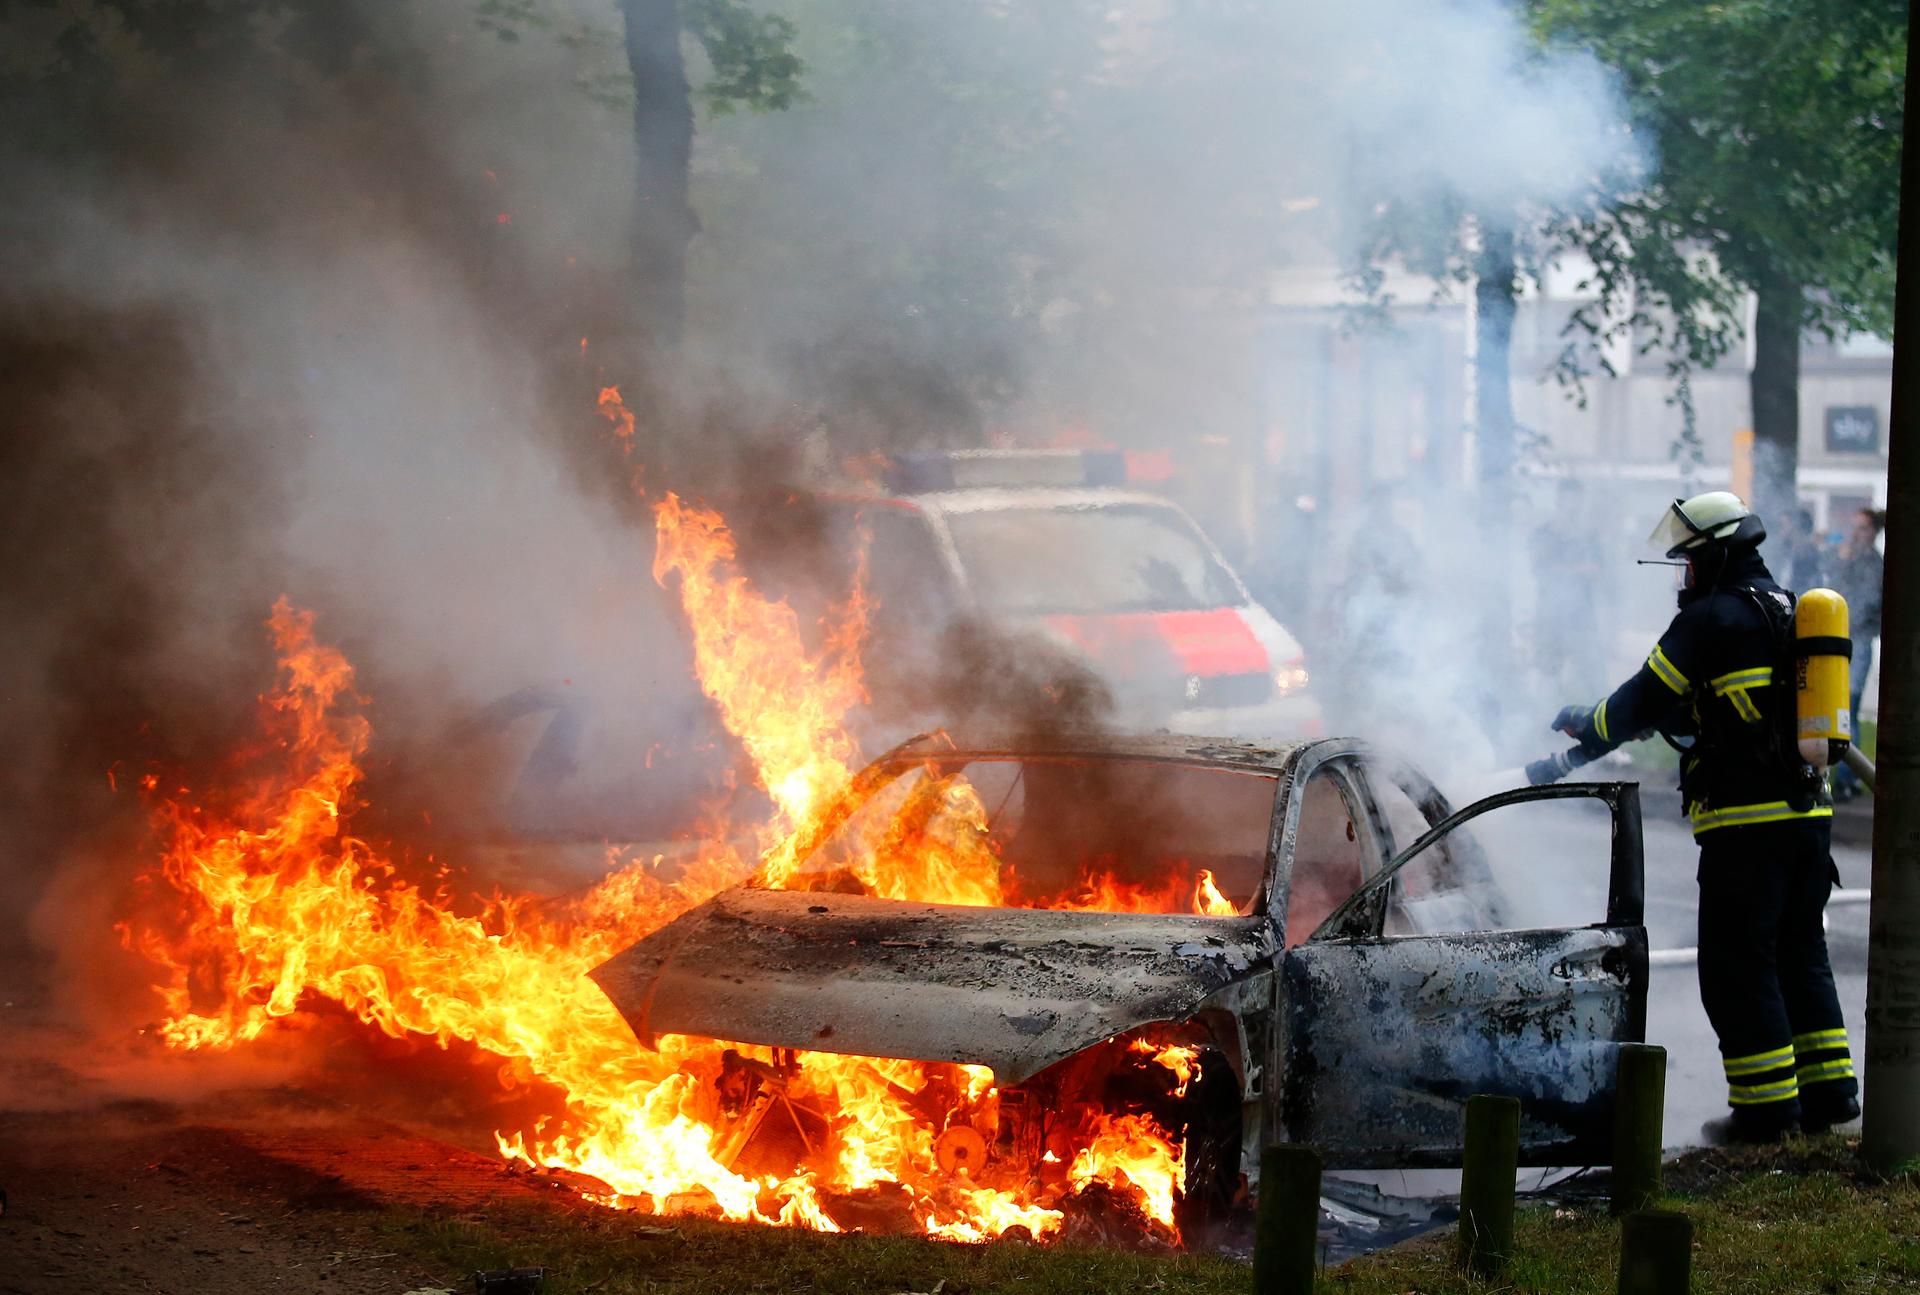 A firefighter tried to put out a car aflame in Hamburg.